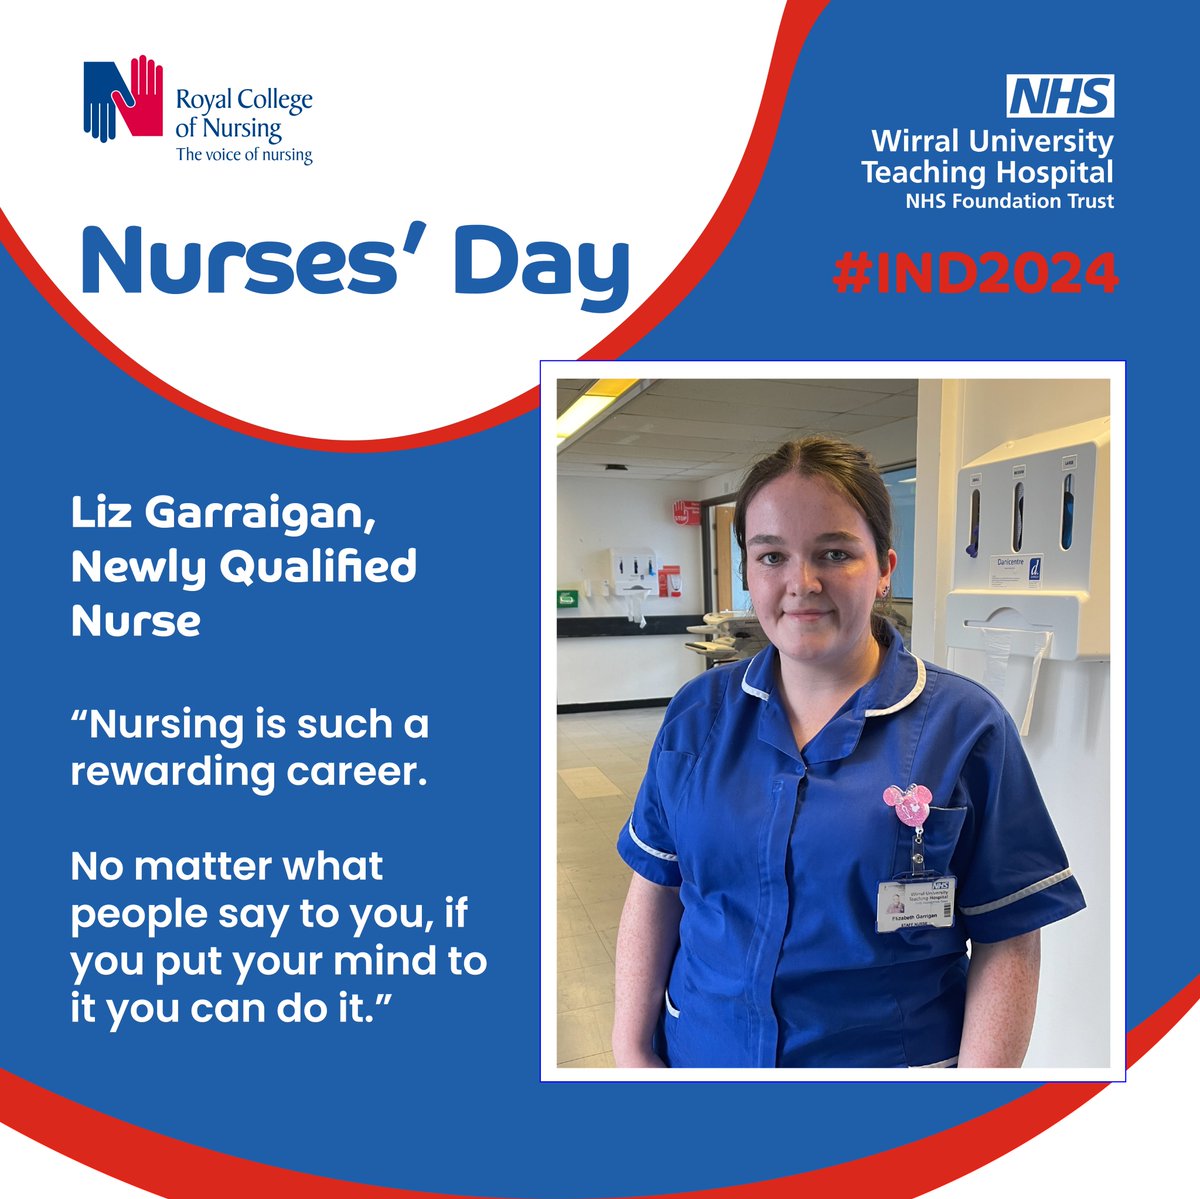 Join our nursing team! 🌟 If you’re passionate about patient care and making a difference, consider a rewarding career in nursing. Liz Garraigan, a newly qualified nurse, shares her inspiring journey. 💙👩‍⚕️ #NursingRecruitment #HealthcareHeroes #IND2024 #OurNursesOurFuture @WHHNHS